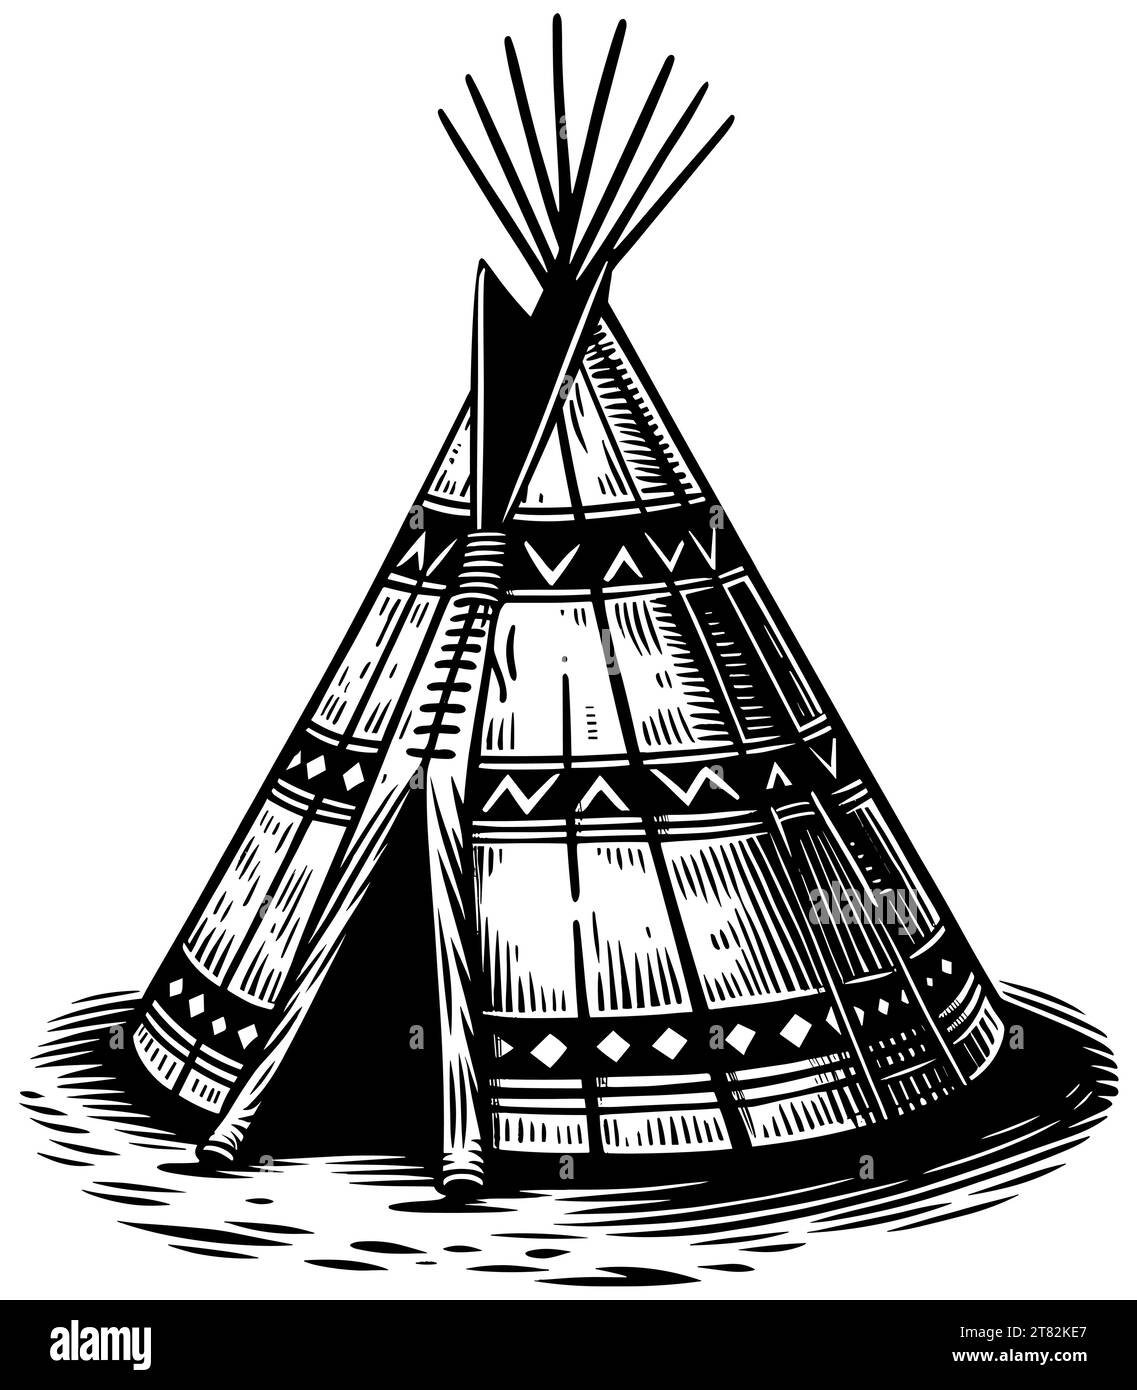 Linocut style illustration of Native American tipi with decorative patterns. Stock Vector